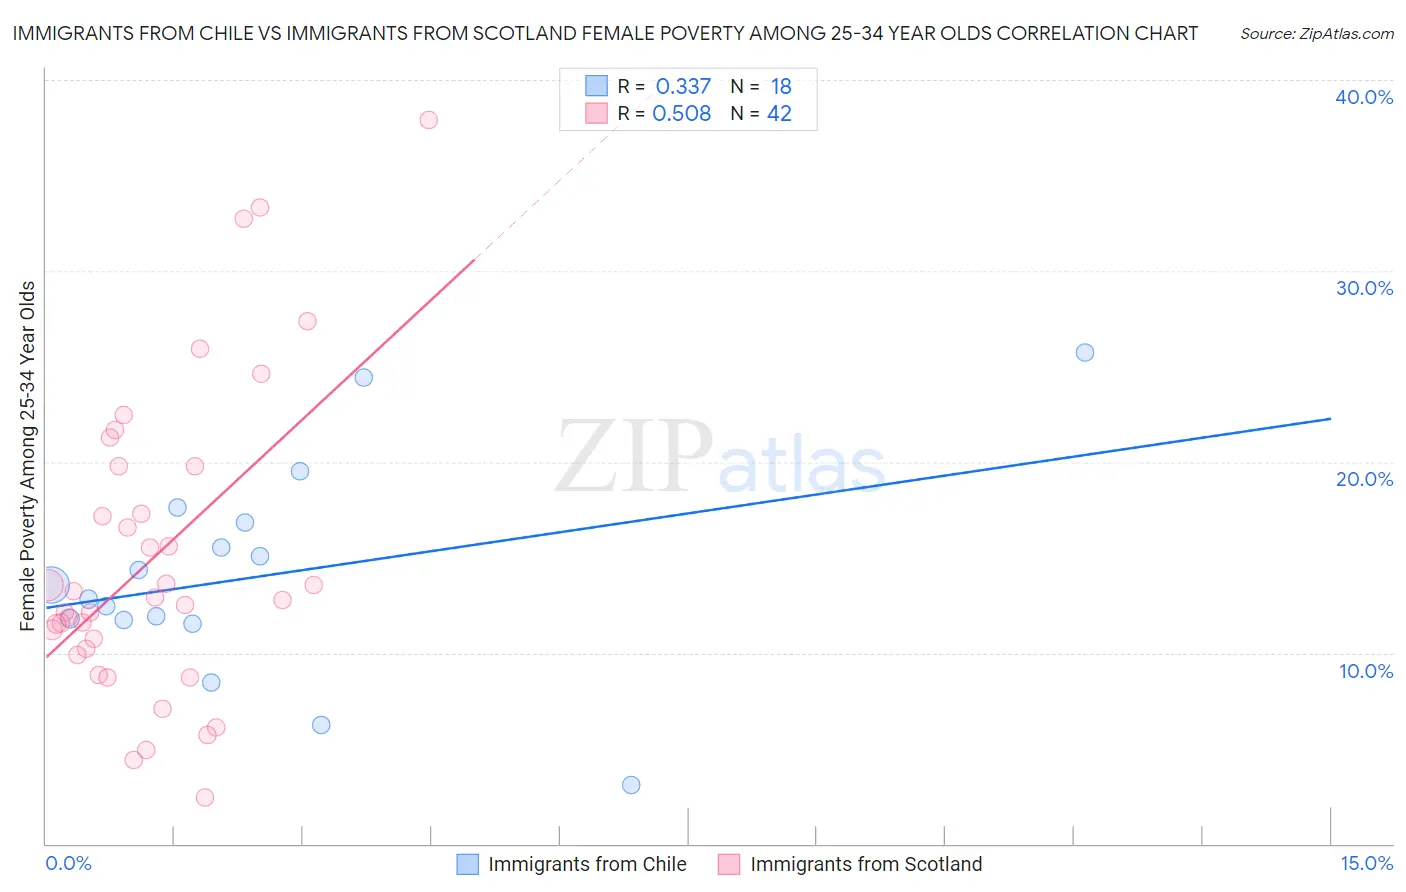 Immigrants from Chile vs Immigrants from Scotland Female Poverty Among 25-34 Year Olds